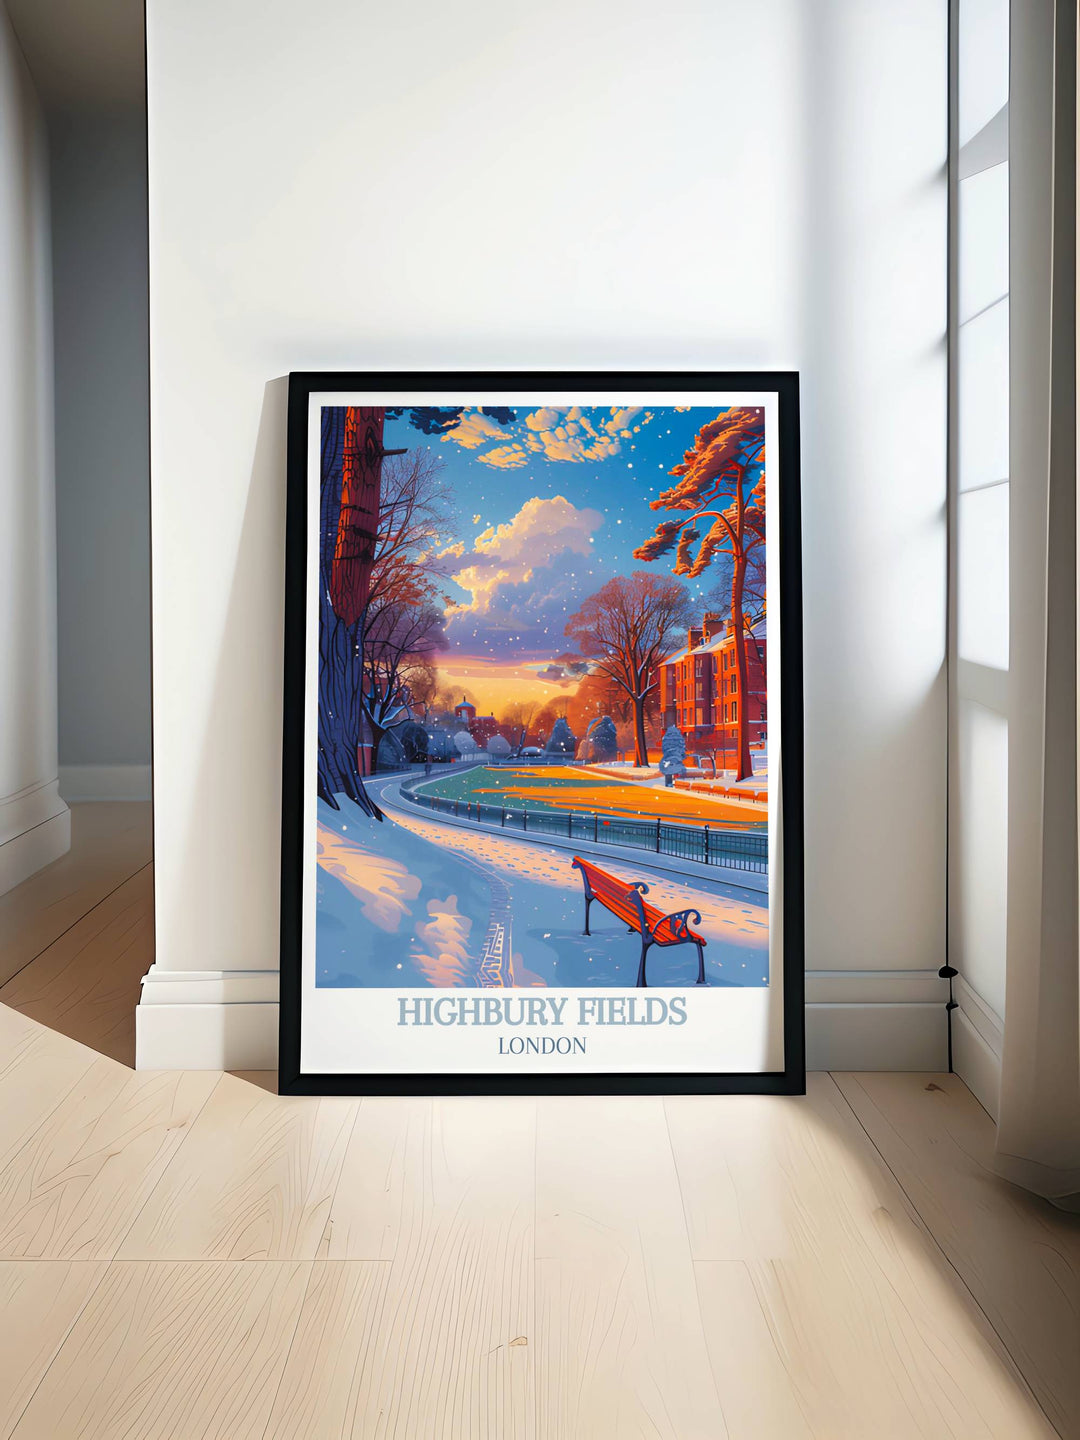 Fine art print of Highbury Fields park displaying vibrant green spaces and leisurely walking paths, ideal for London themed decor